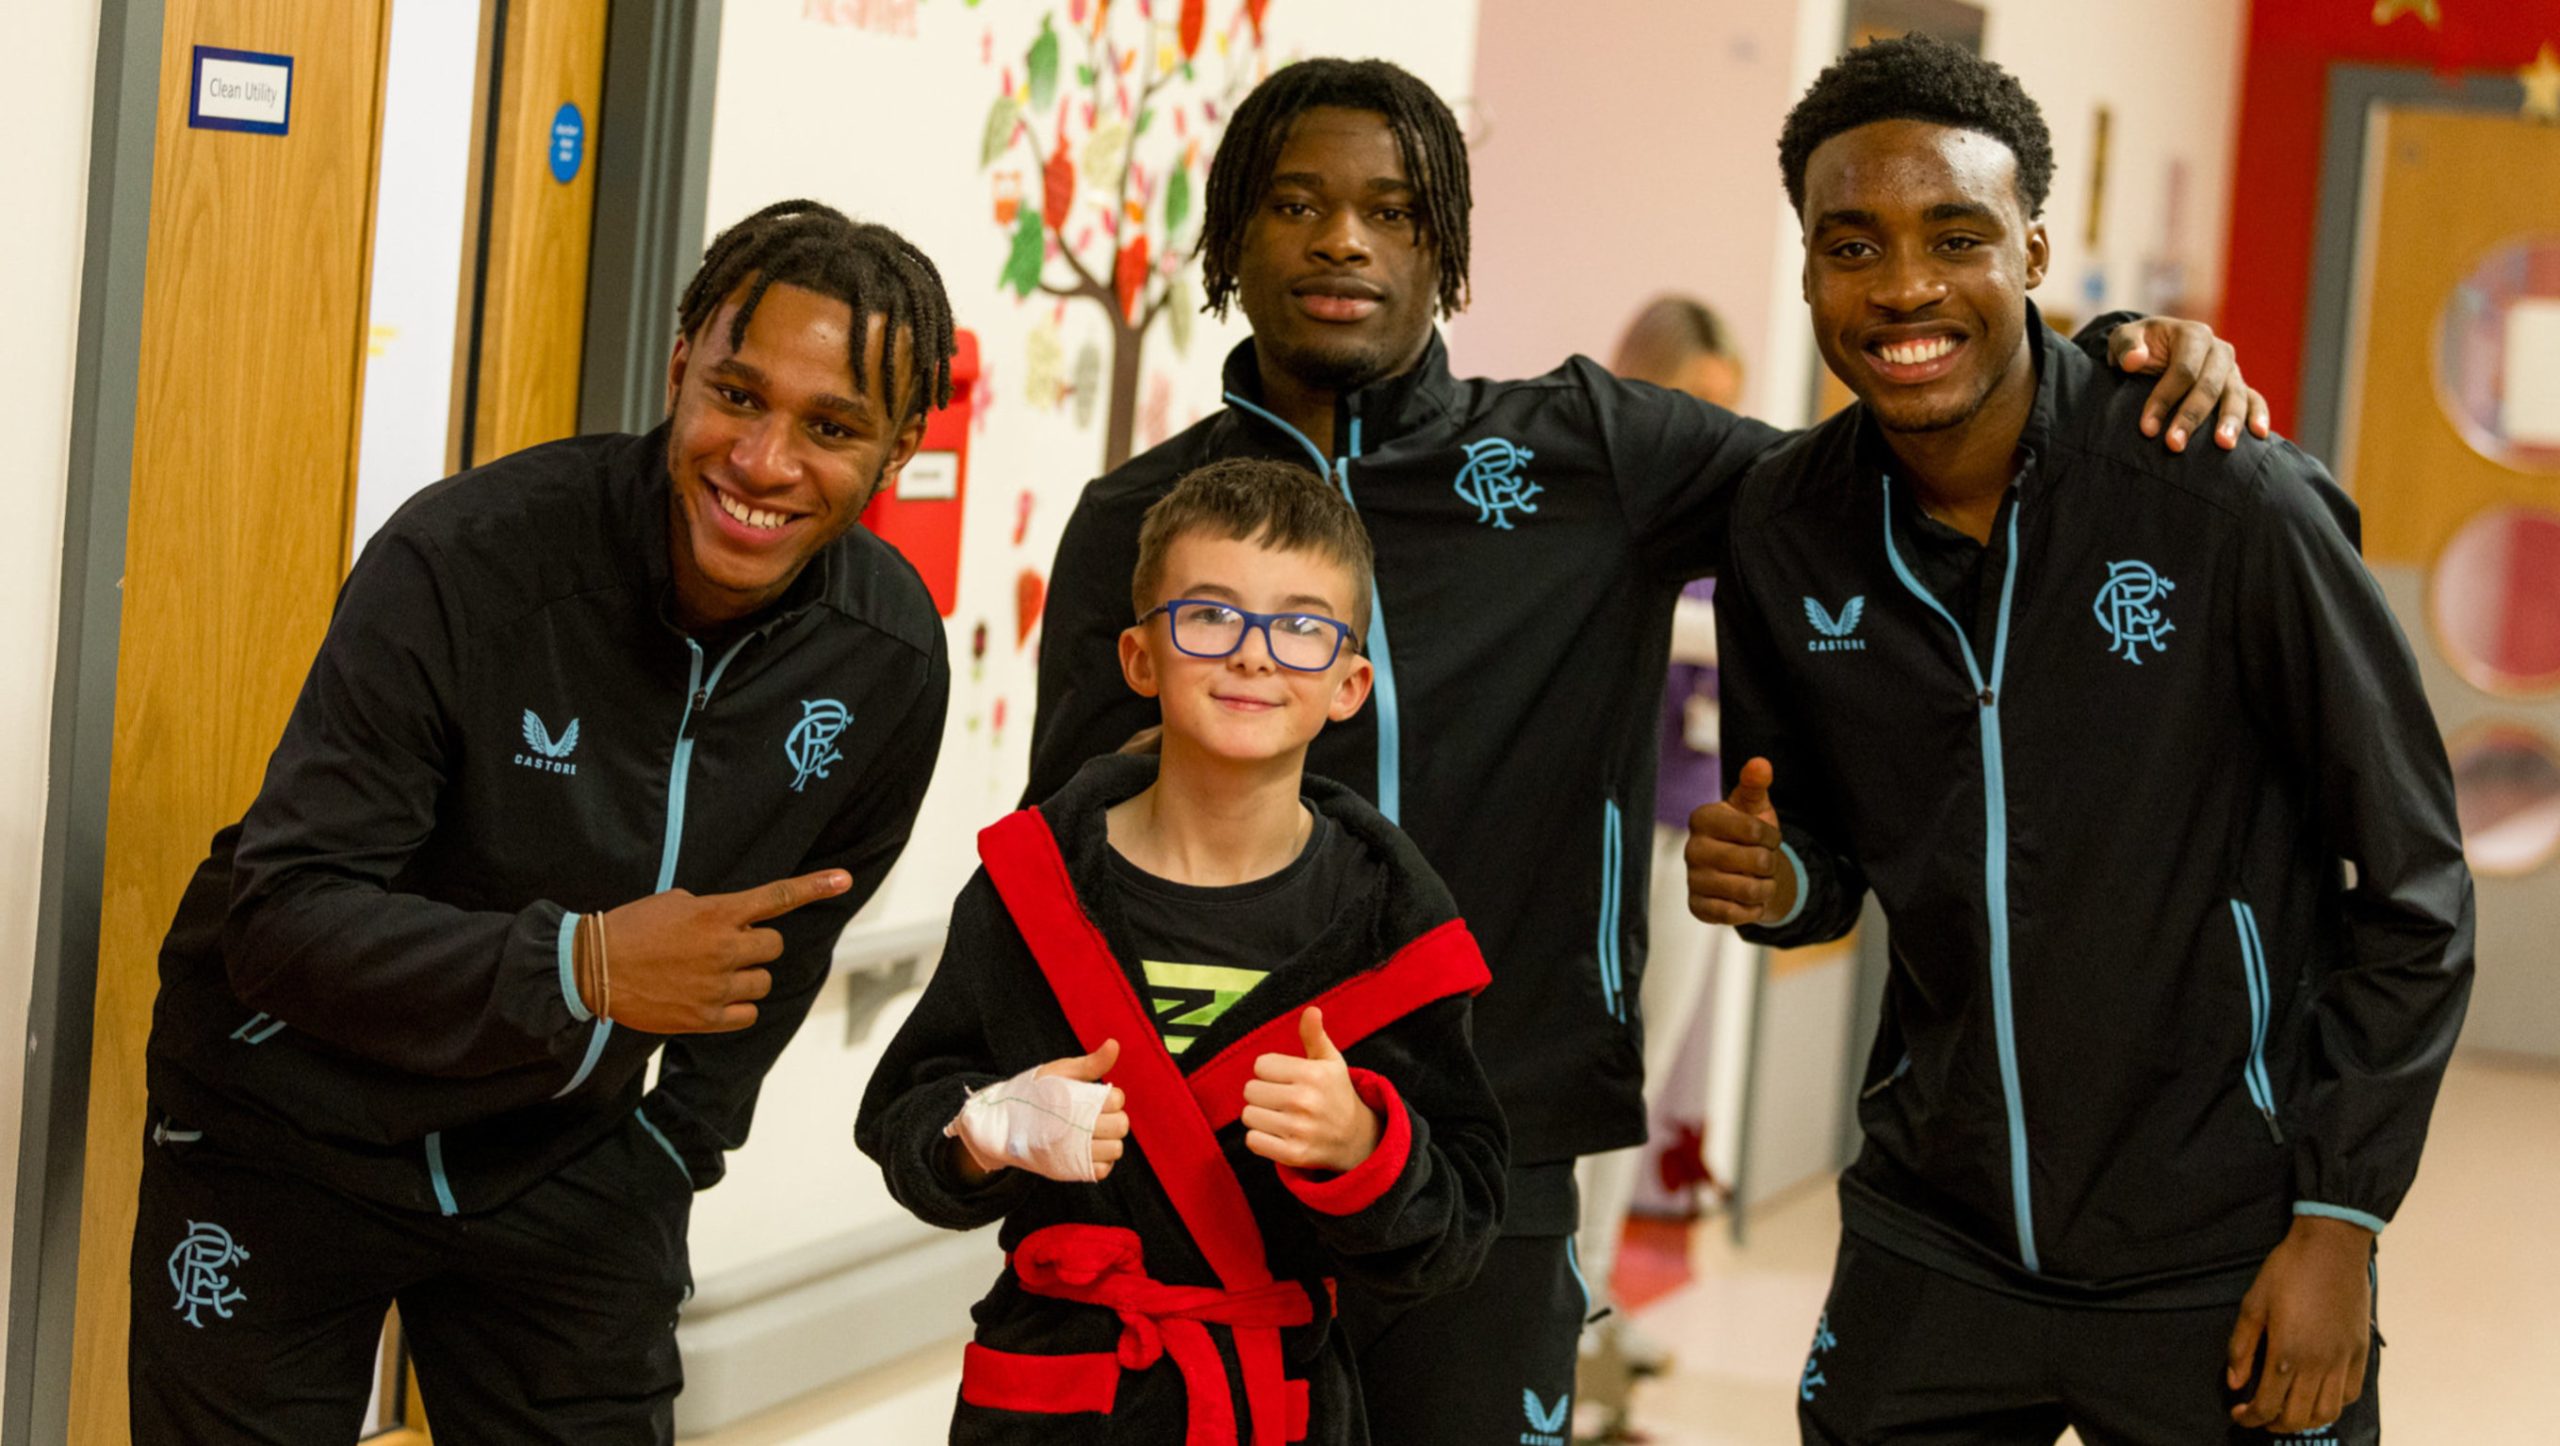 Academy players at Children's Hospital